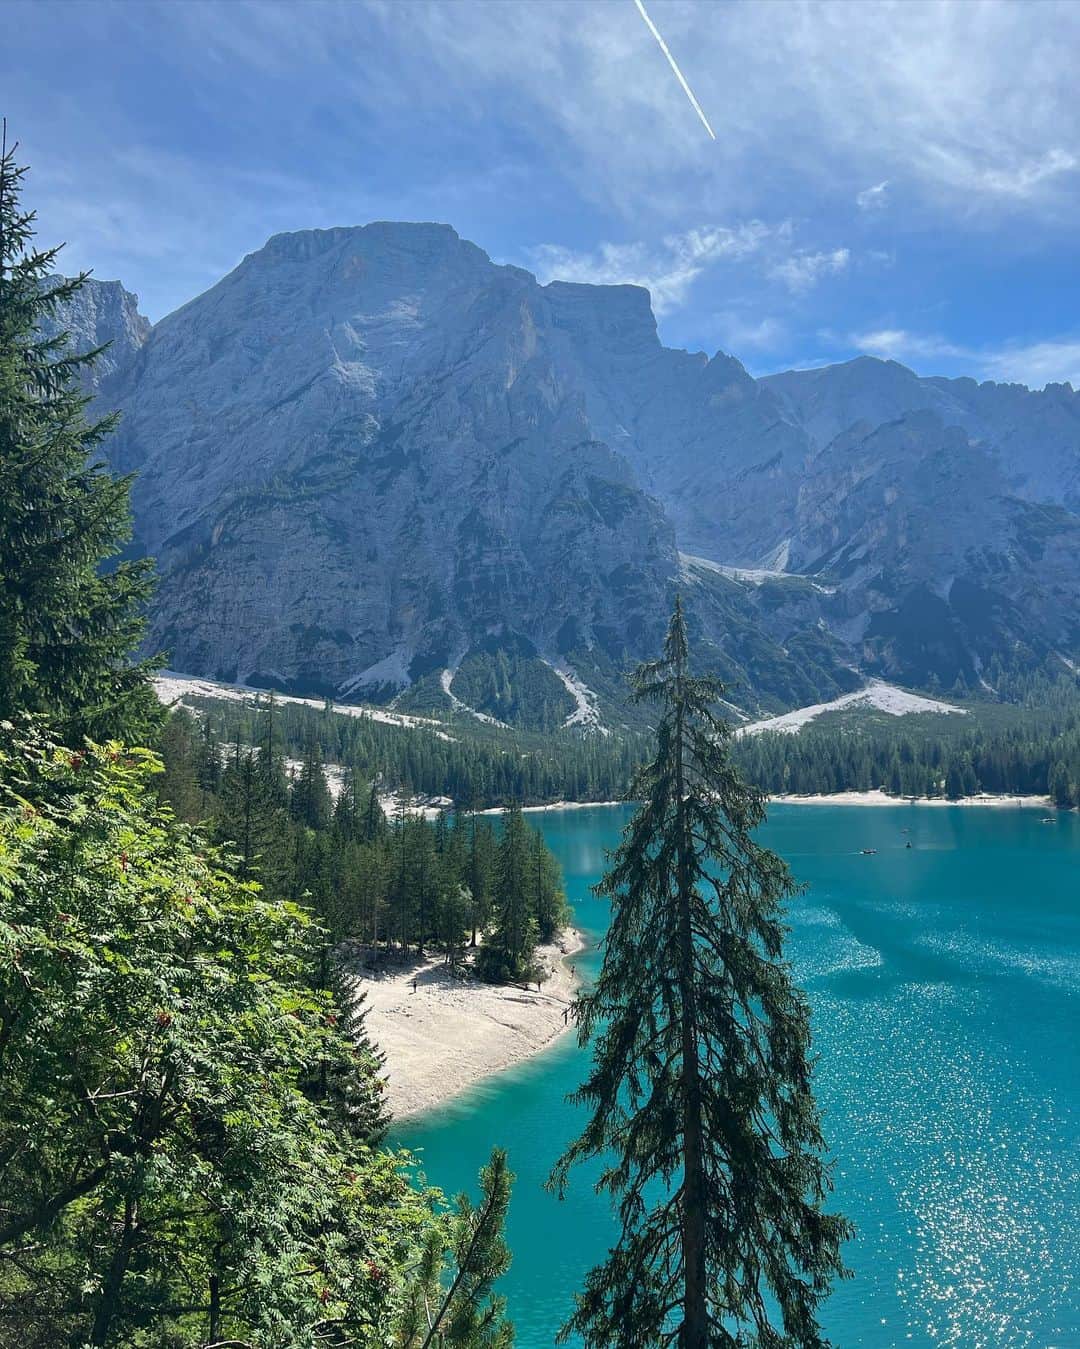 Zanna Van Dijkさんのインスタグラム写真 - (Zanna Van DijkInstagram)「SOLD OUT! HIKE THE DOLOMITES WITH ME 🇮🇹  Spaces are now available for my next group hiking trip in 2023! Here’s all the deets:  ➡️ When? 15-22nd July 2023  ➡️ What? An immersive hiking adventure through The Dolomites, my favourite mountains in the world! I have handpicked the very best routes - think towering peaks, glacial lakes and alpine meadows. All fuelled by delicious local food Italian food. The dream! 🥾   ➡️ What will we see? Highlights include: ✨ 8 days exploring the UNESCO listed landscape that is the Dolomites. Including the famous Lago Federa, Tre Crime di Lavaredo and Cinque Torri. ✨ Experience the beauty of the region. Alpine lakes, rugged mountains, powerful waterfalls and lush green valleys. It's an incredible sight. ✨ A mid-trip relaxing day at Lago di Brais. A chance to let your legs rest & take a dip in the crystal blue water! ✨ Fuel up with delicious local food and tuck into hearty mountain hut meals. We can sample all the strudel!  ➡️ Price & booking? The price is £2500. Not including international flights. Bookings can be made through my website shop, you can also find more info and the full detailed itinerary there ✅   ➡️ Anything else? Veggie and vegan options will be provided. You’ll need an intermediate level of fitness for this adventure as some days we will be hiking 10-15km. More FAQs are answered on my stories 🏔️   I can’t wait to make memories with you! ♥️ (ad - my own retreat) #hikingretreat #grouphiking」5月4日 19時59分 - zannavandijk